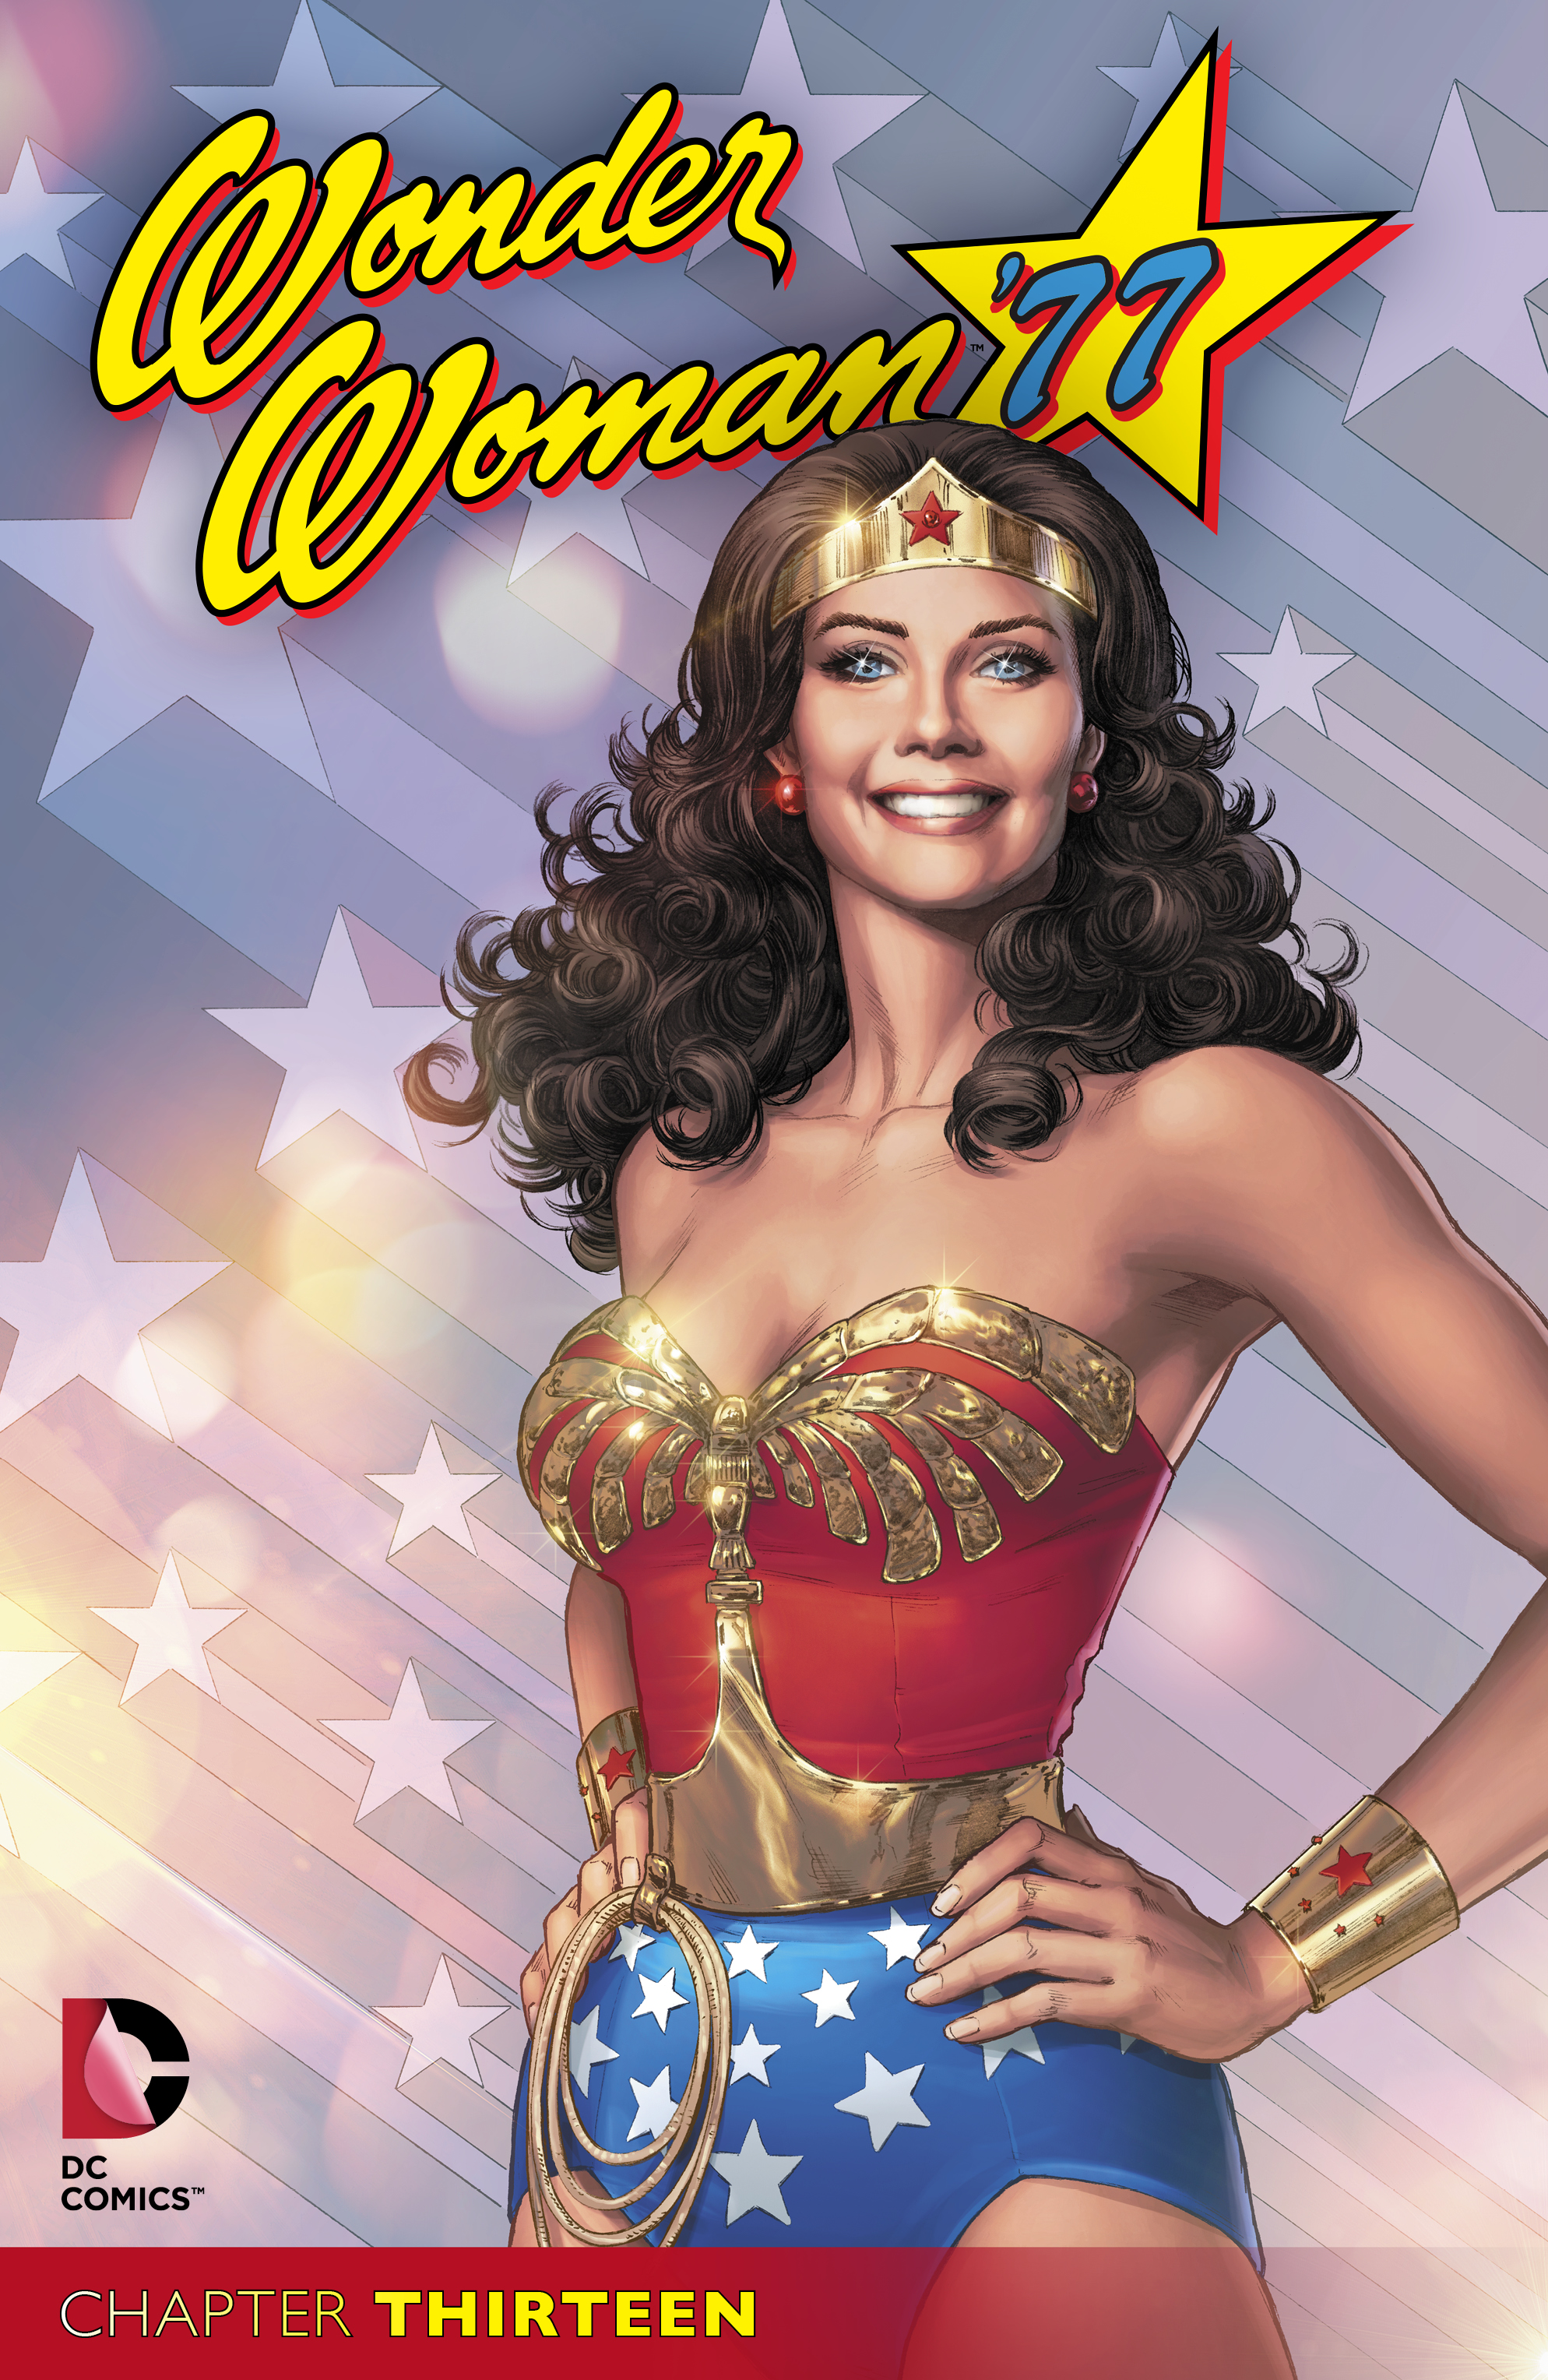 Wonder Woman '77 #13 preview images